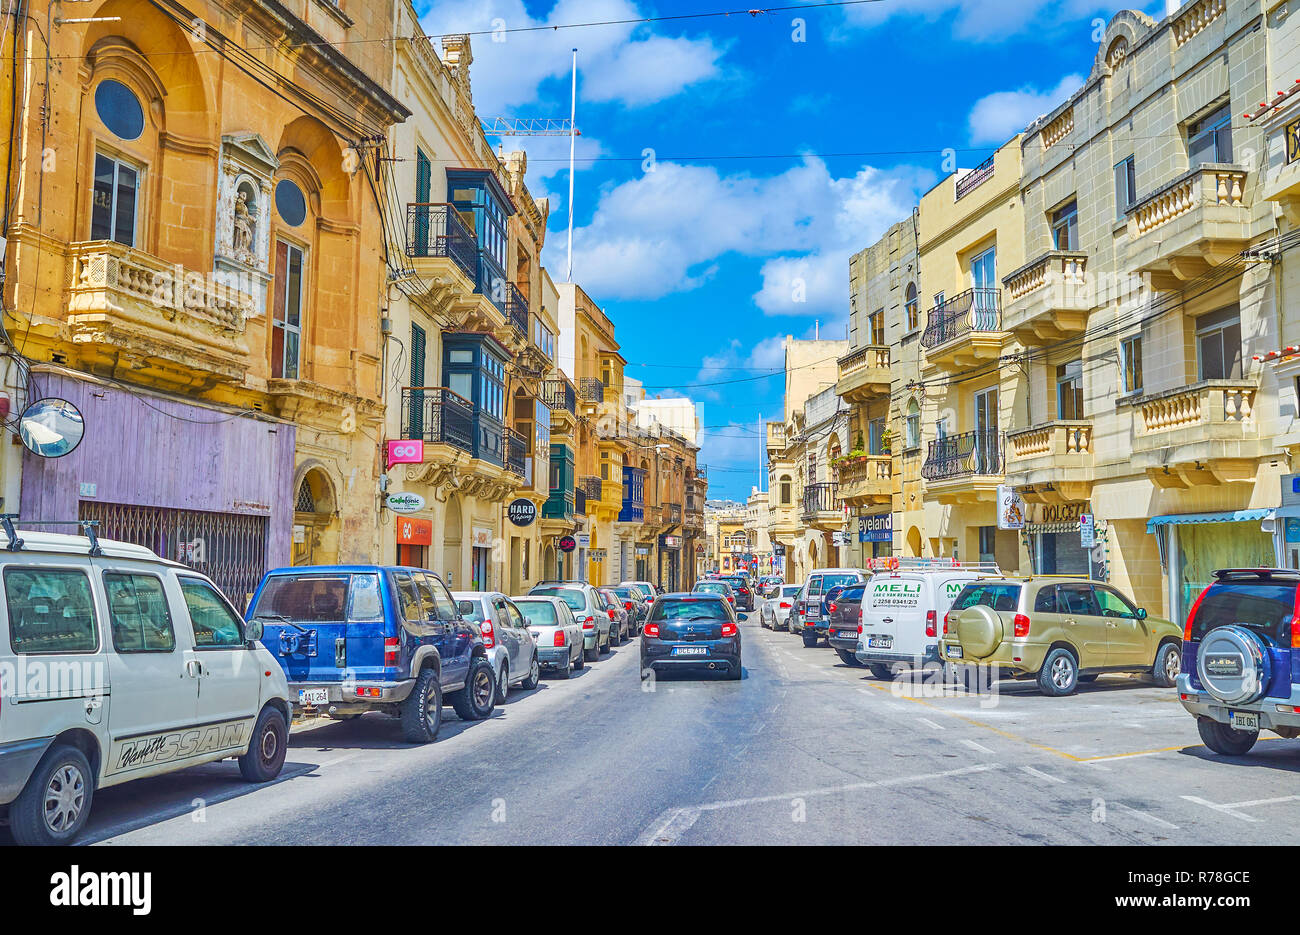 MOSTA, MALTA - JUNE 14, 2018: The busy traffic in Il-Kbira street, lined with old mansions, stores and cafes, on June 14 in Mosta. Stock Photo